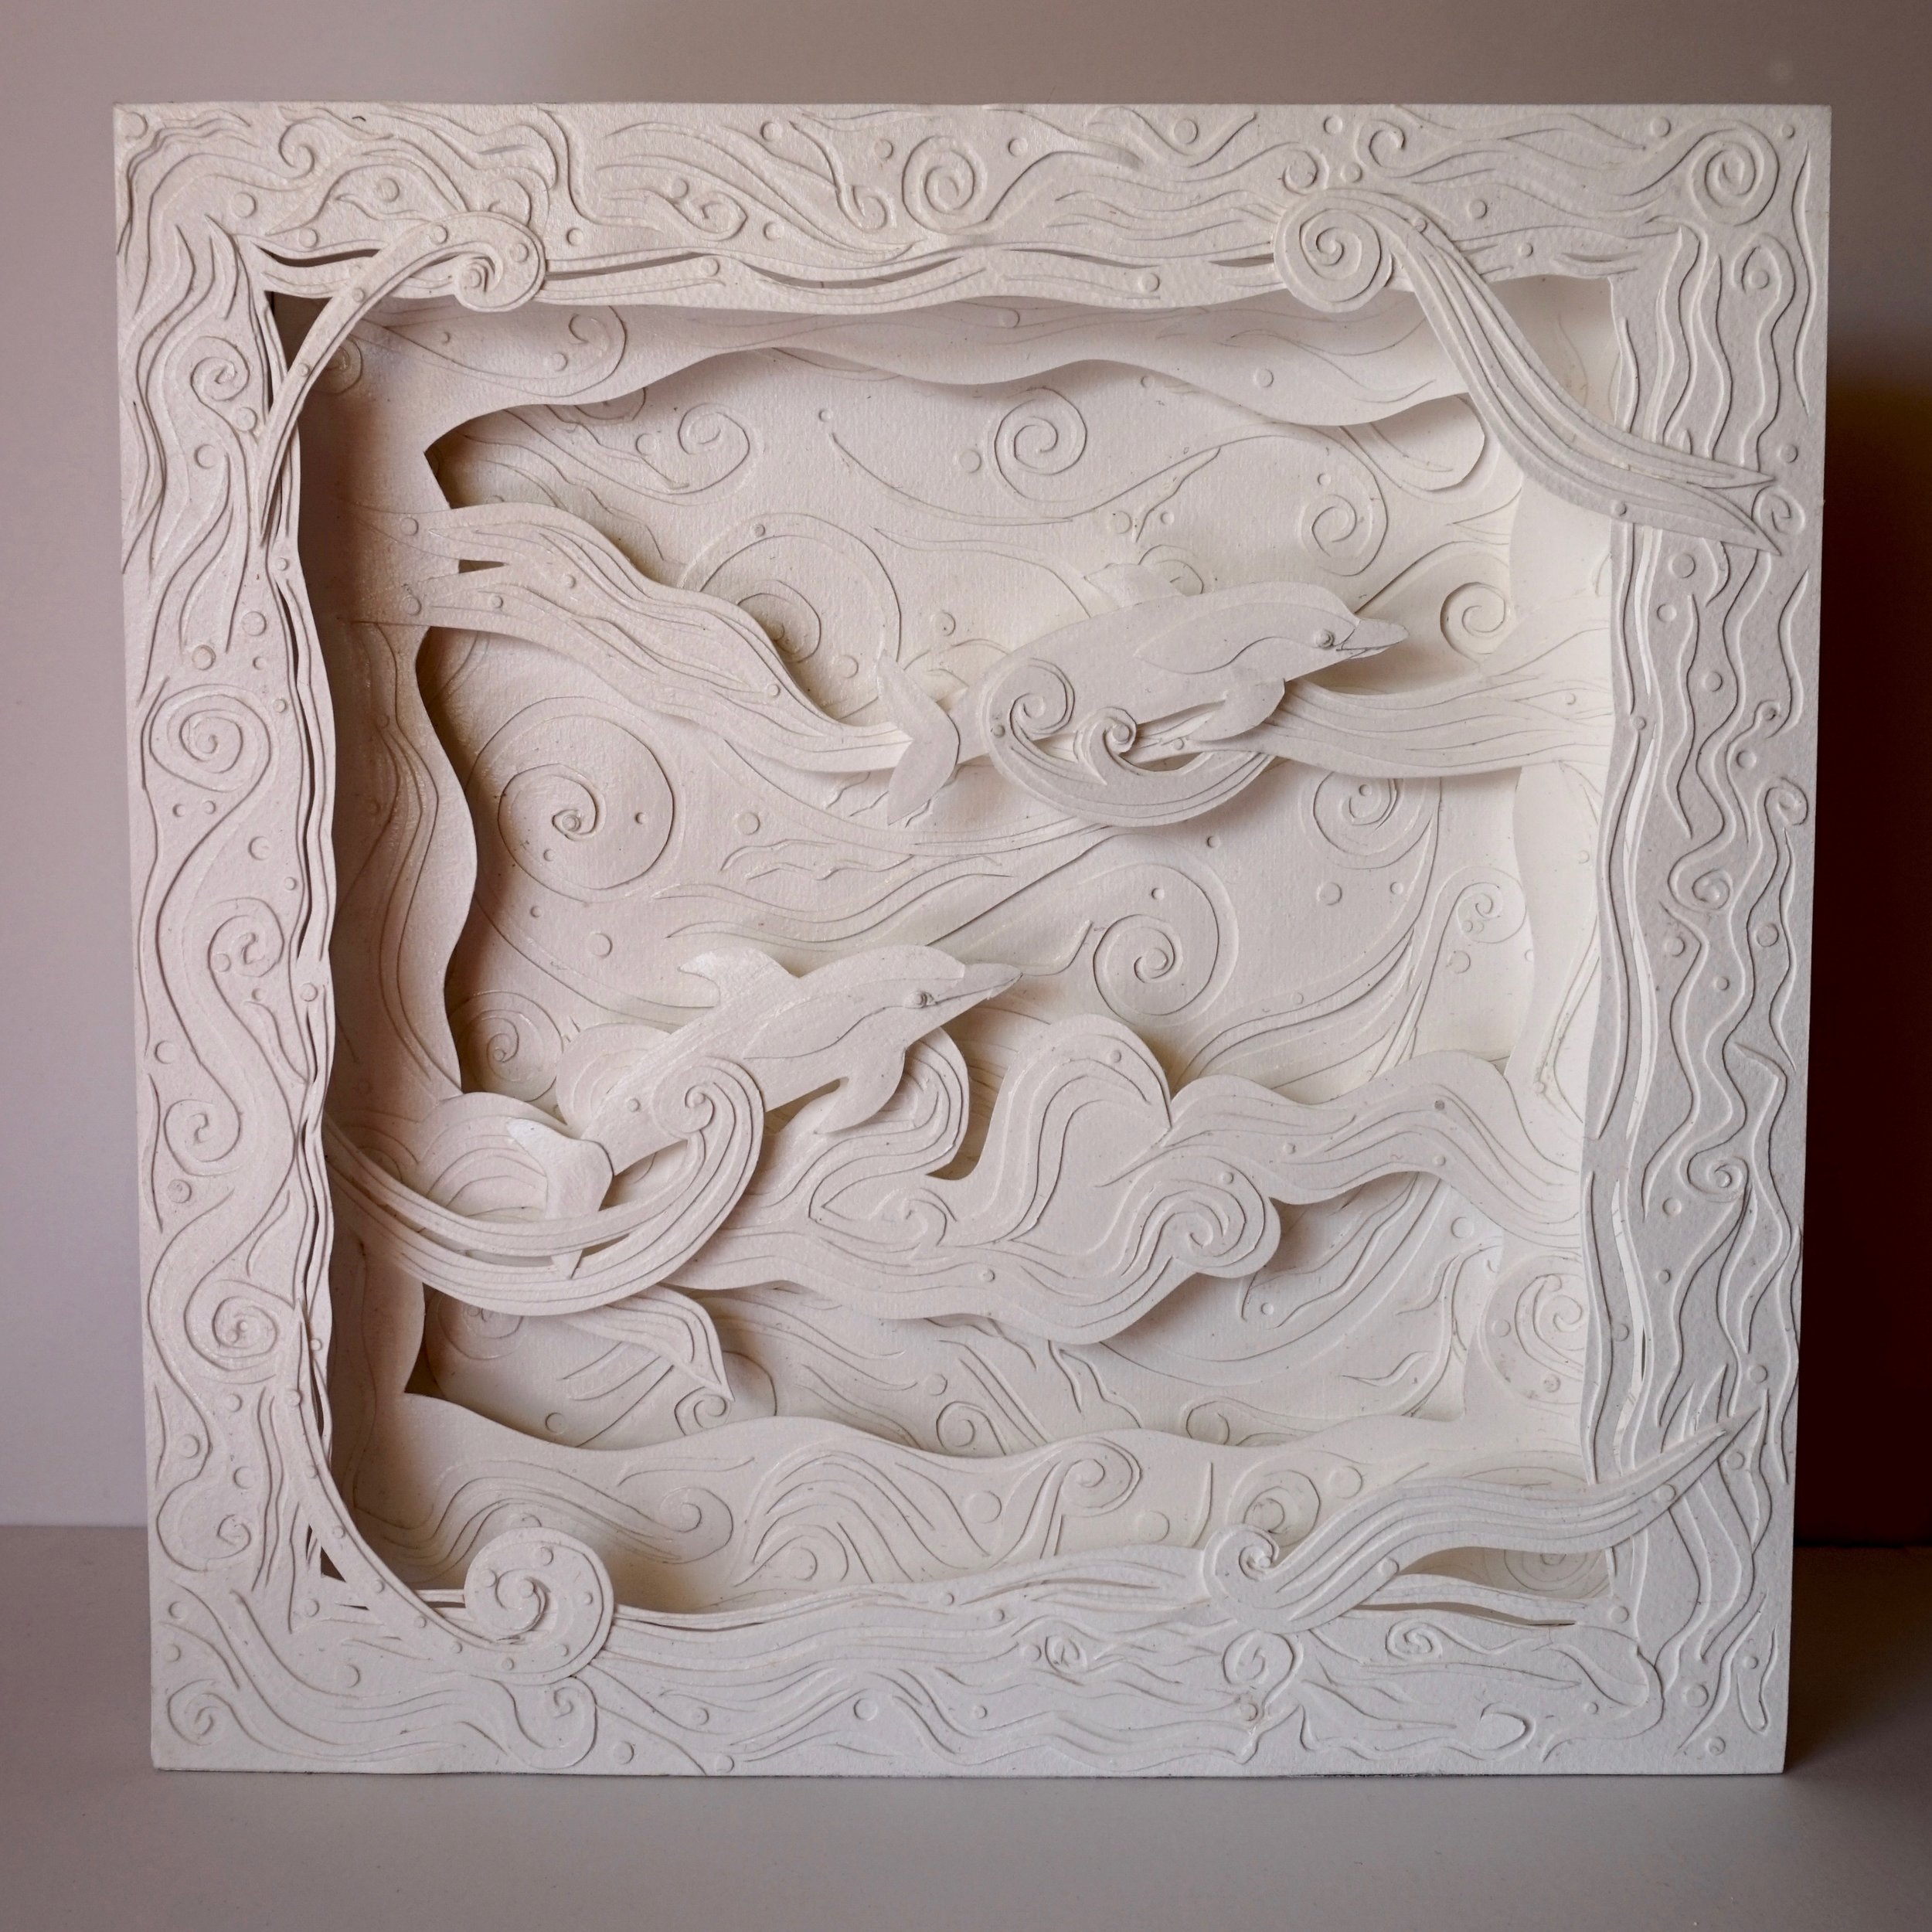 Ride the Wave paper sculpture in 12" x 12" box.